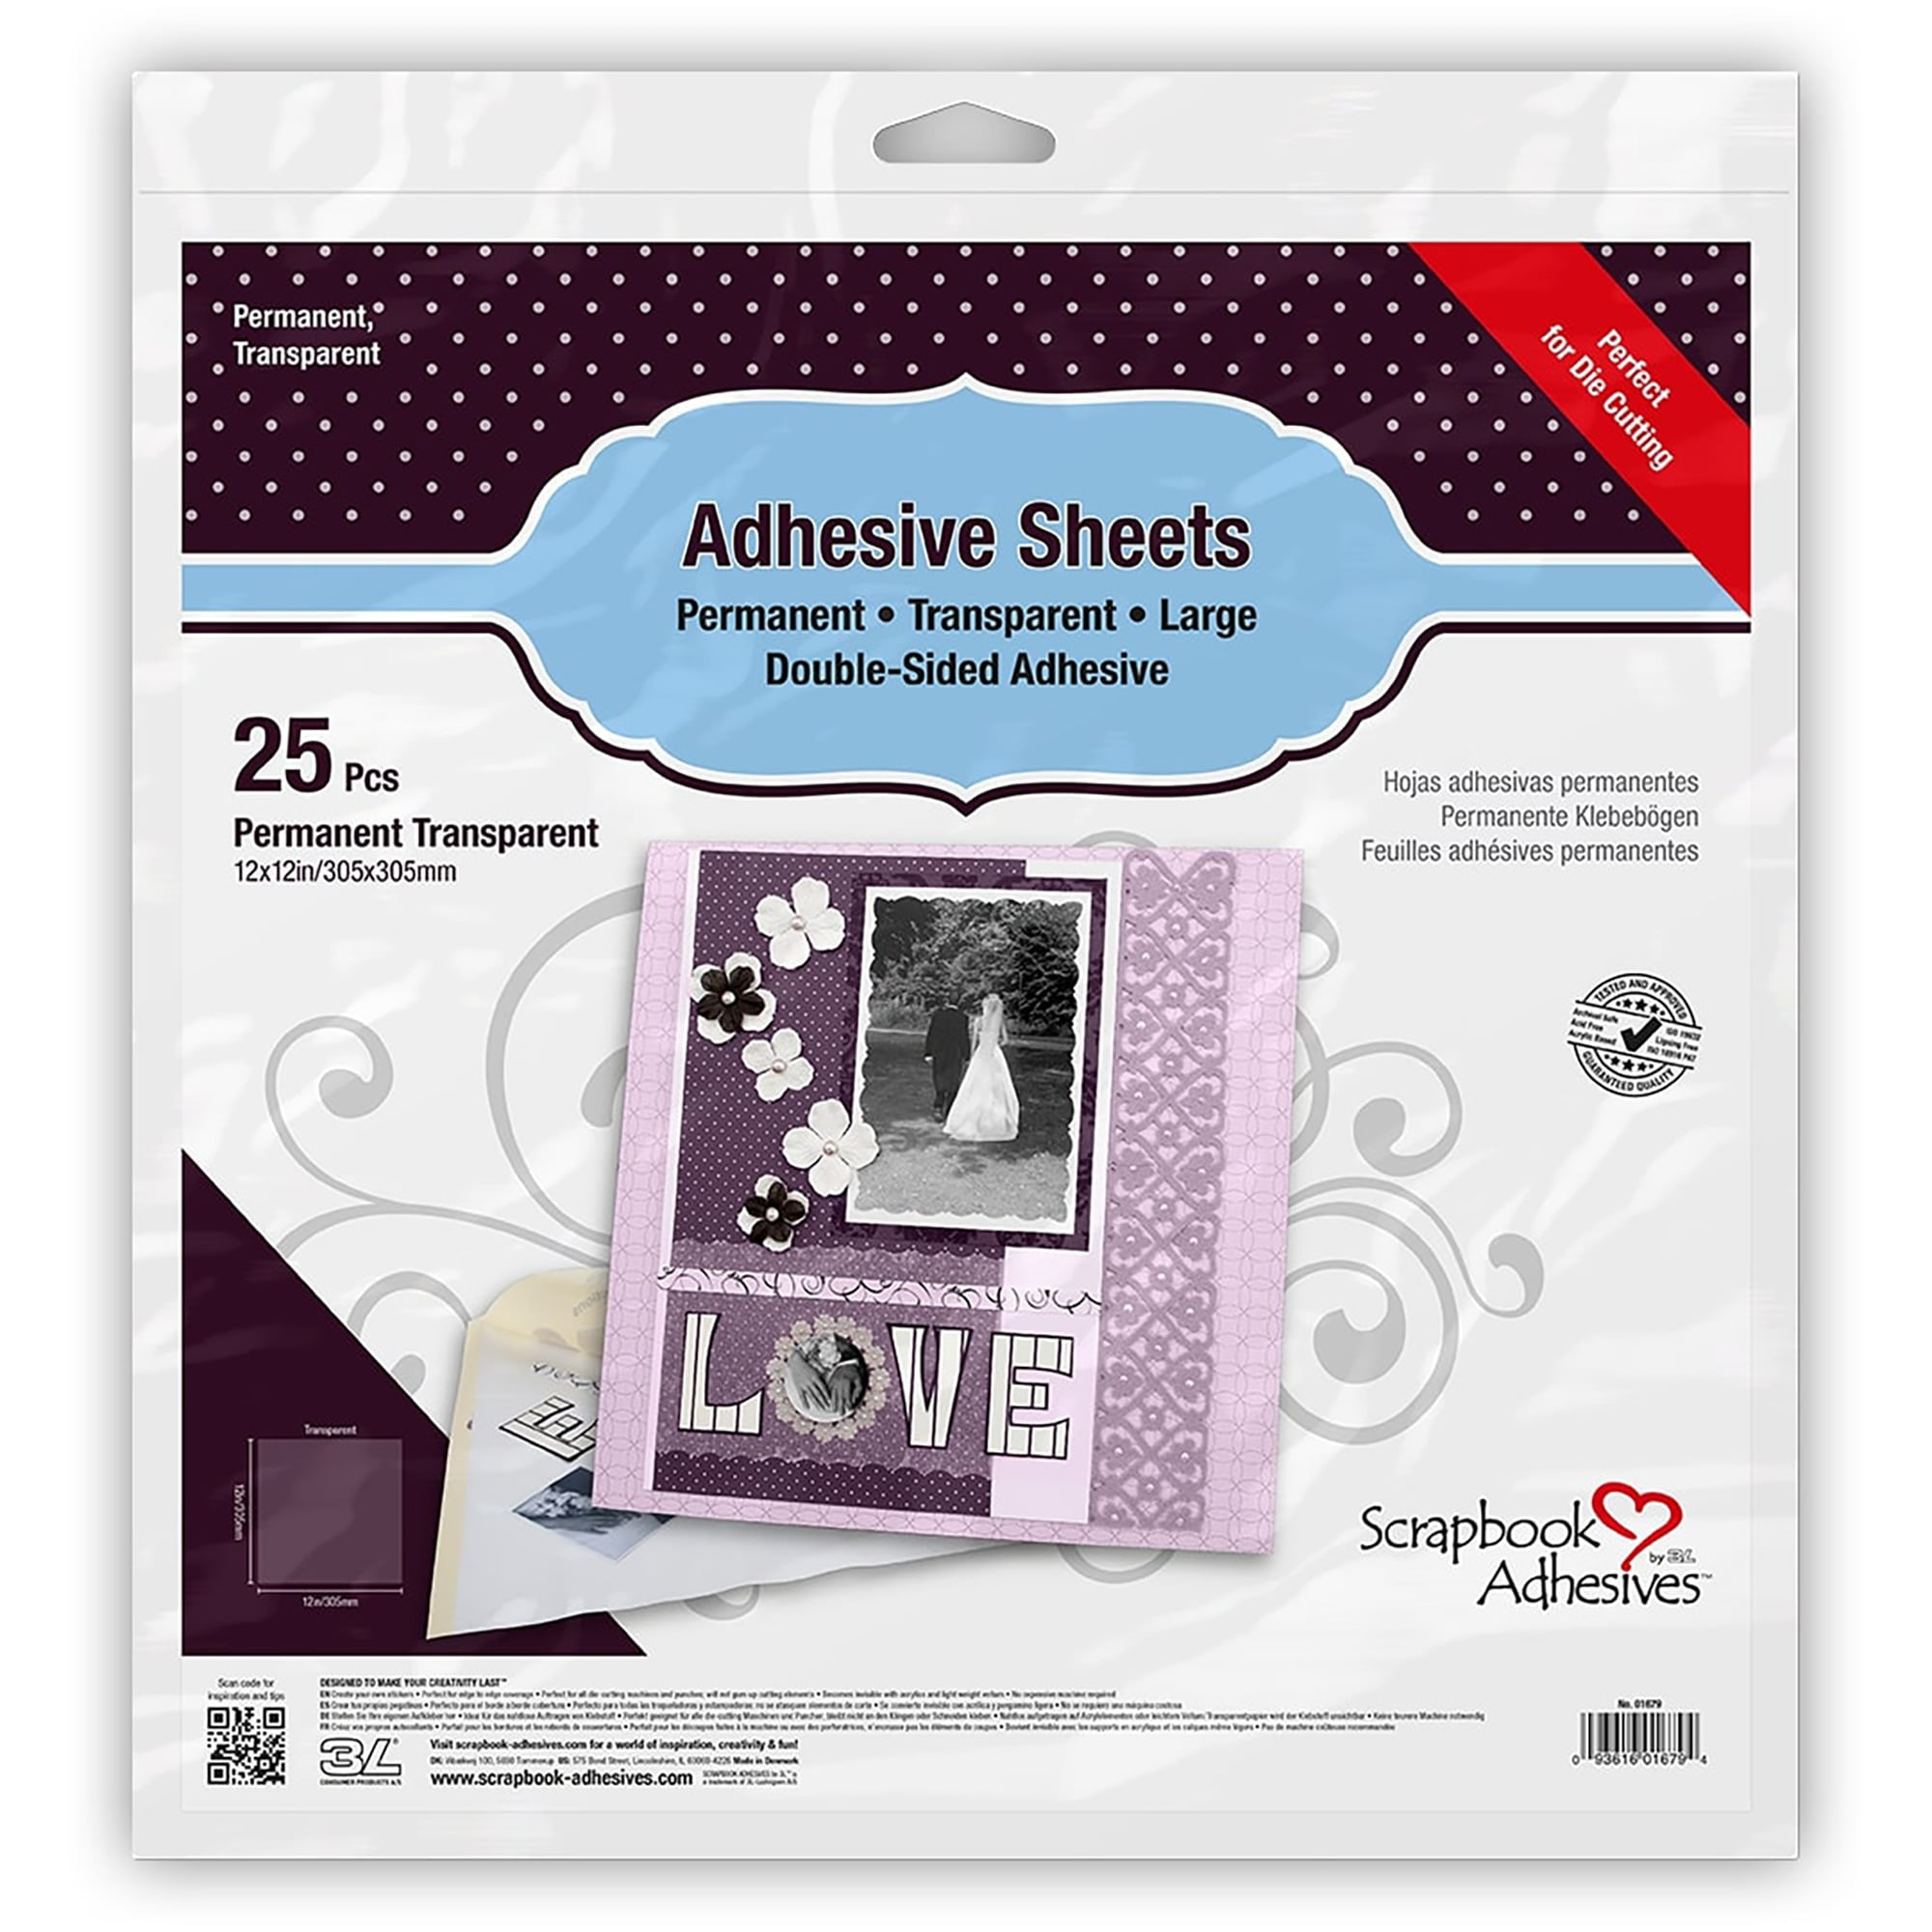 Scrapbook Adhesives by 3L: Adhesive Sheets 25 Pack - 12x12 Permanent  Transparent Sheets, Double-Sided Adhesive, Large, Perfect For Die Cutting 